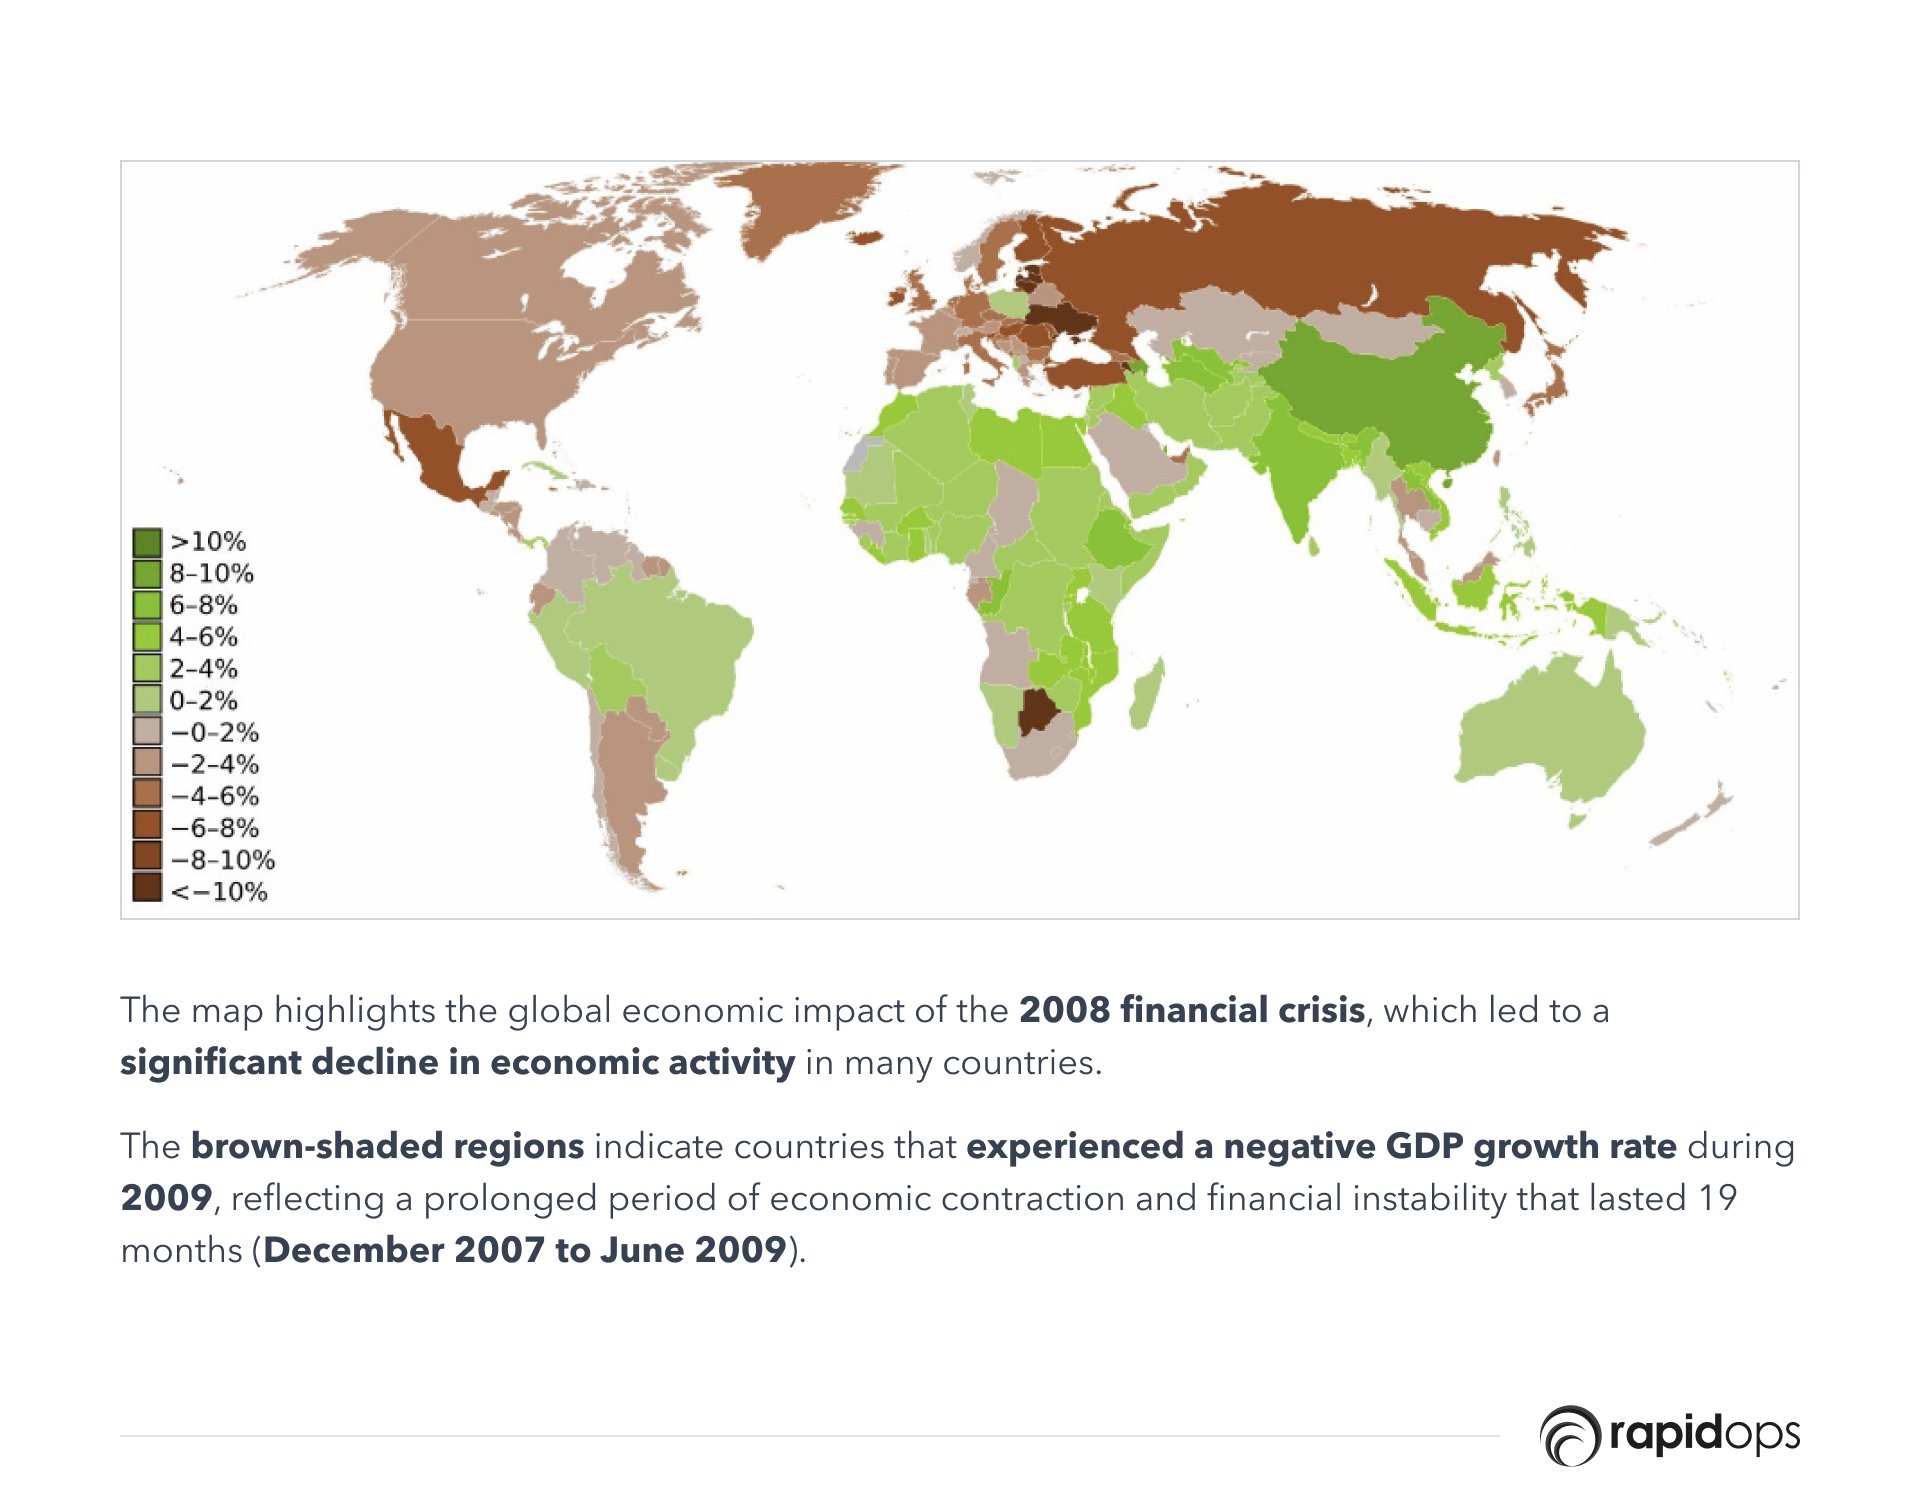 Map highlighting global economic impact of 2008 recession